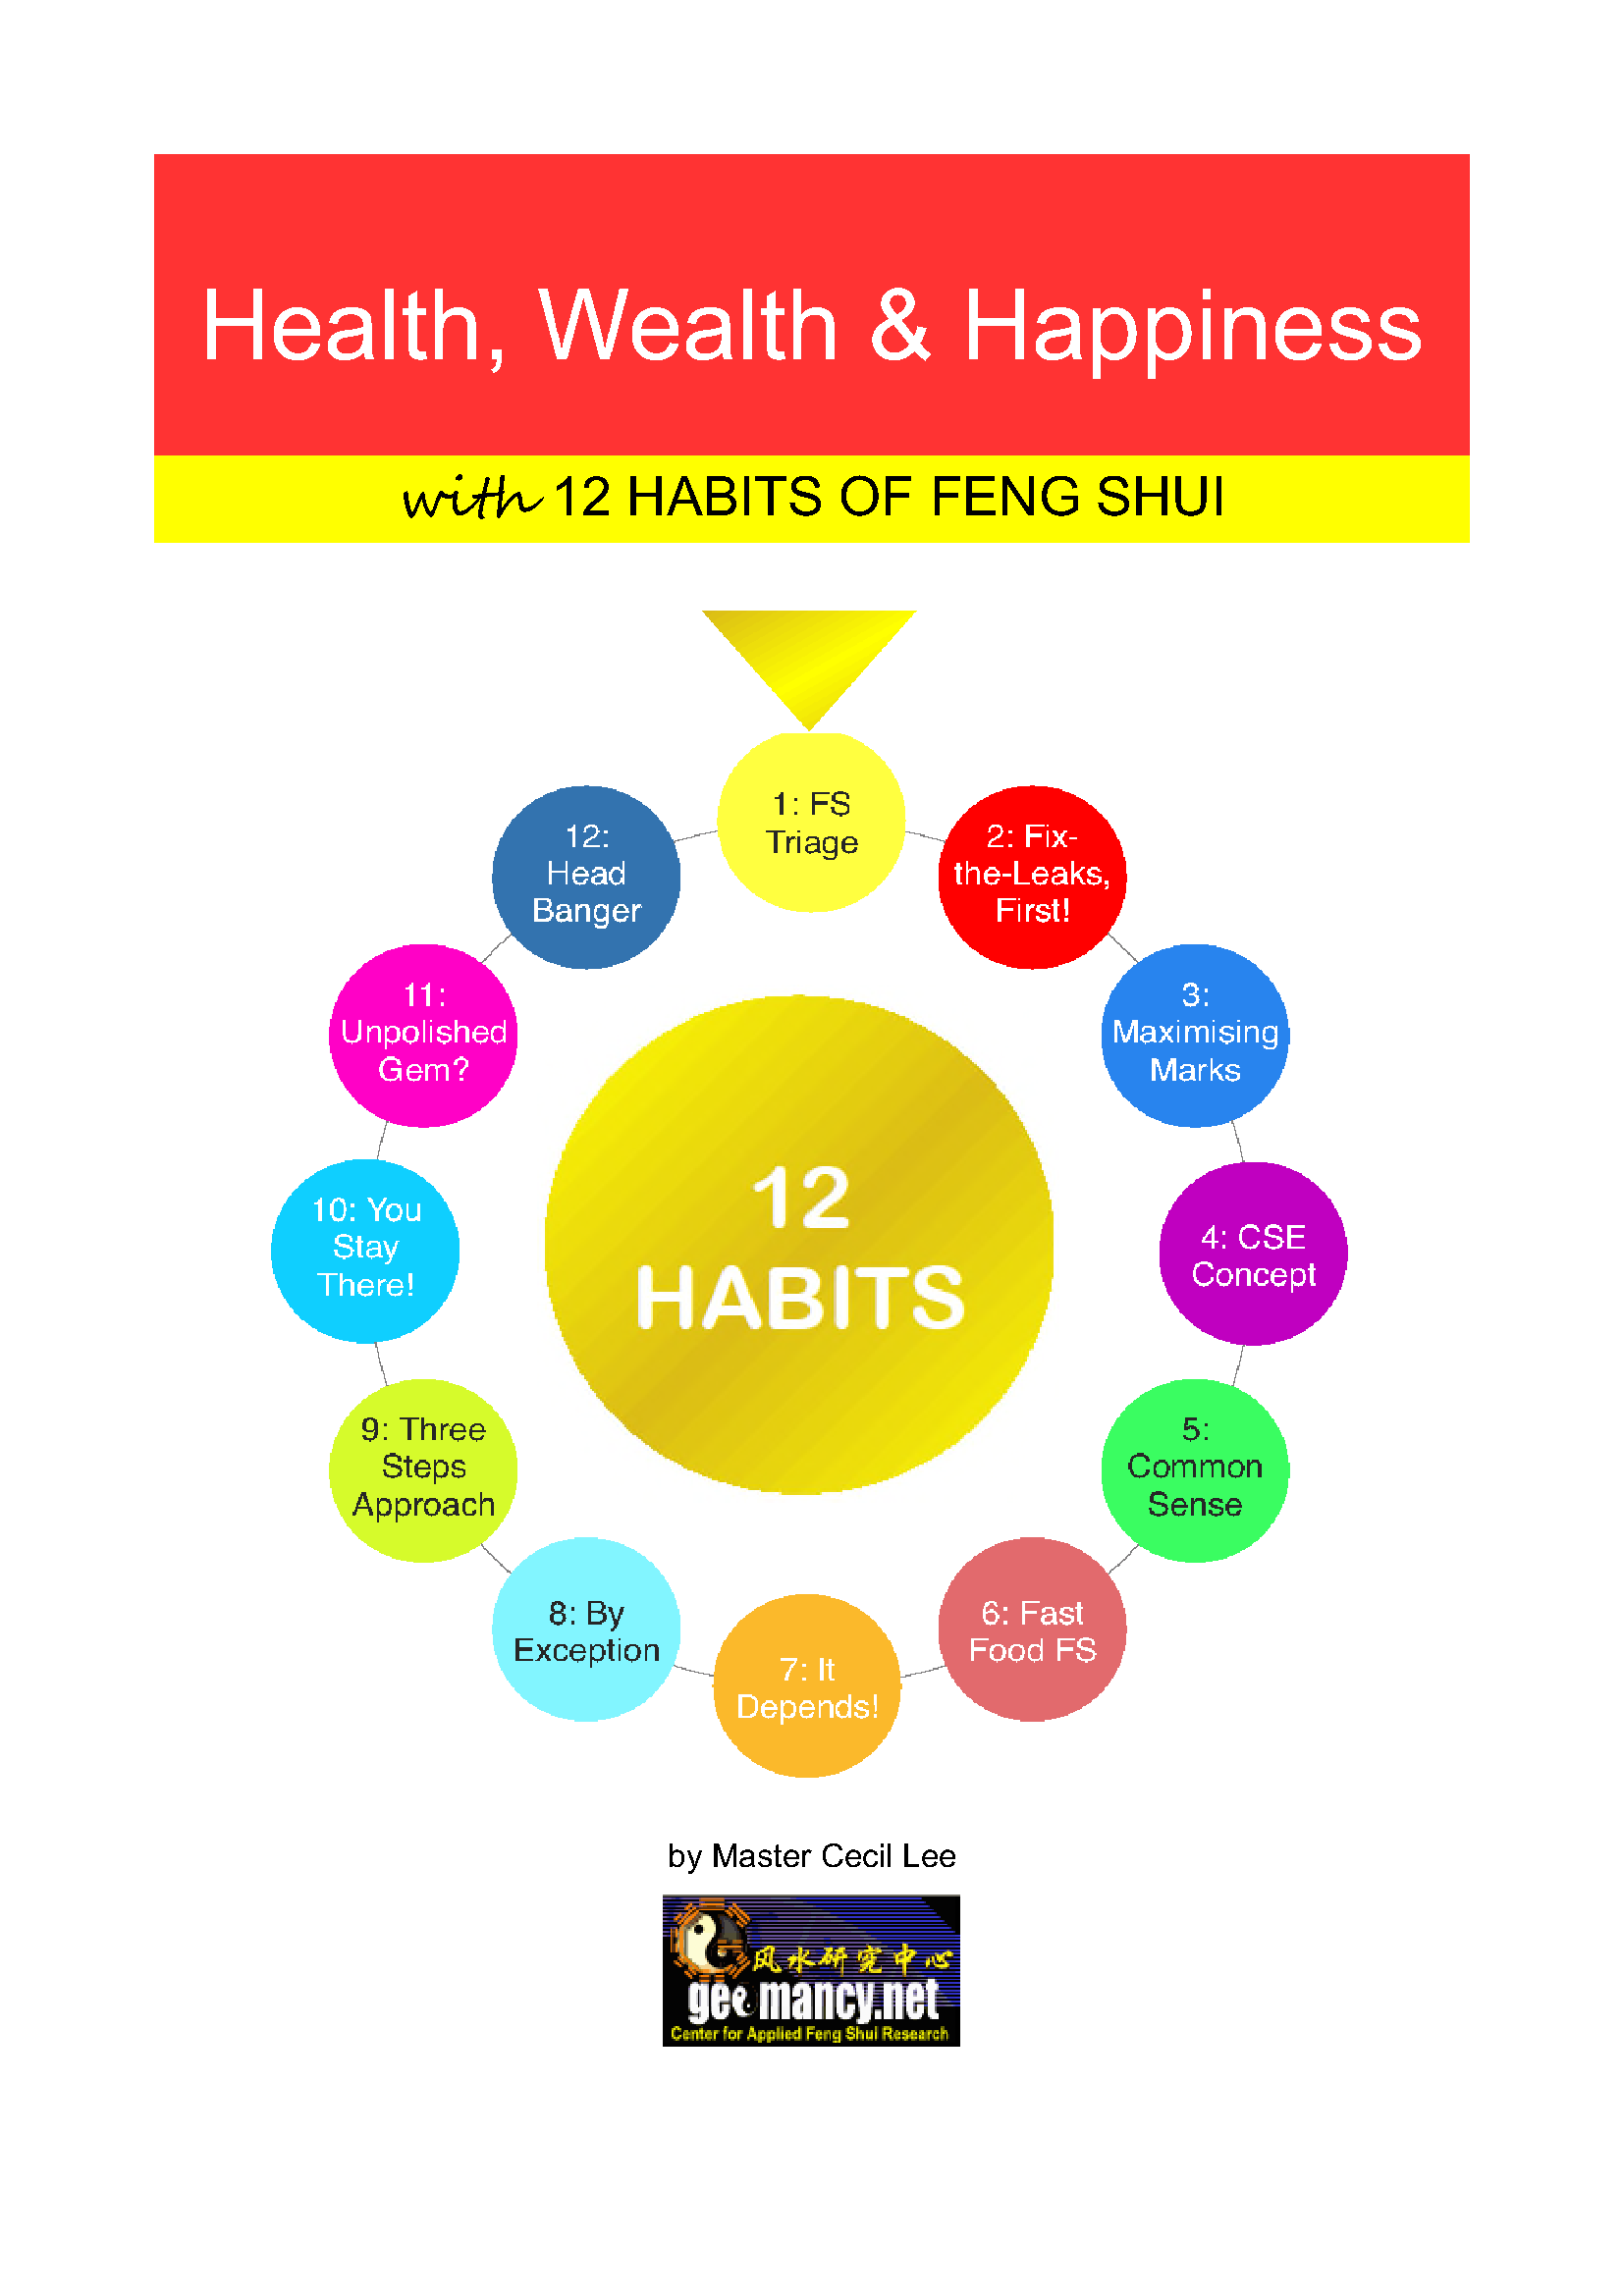 2020: 12 Habits of Feng Shui (1st Edition)